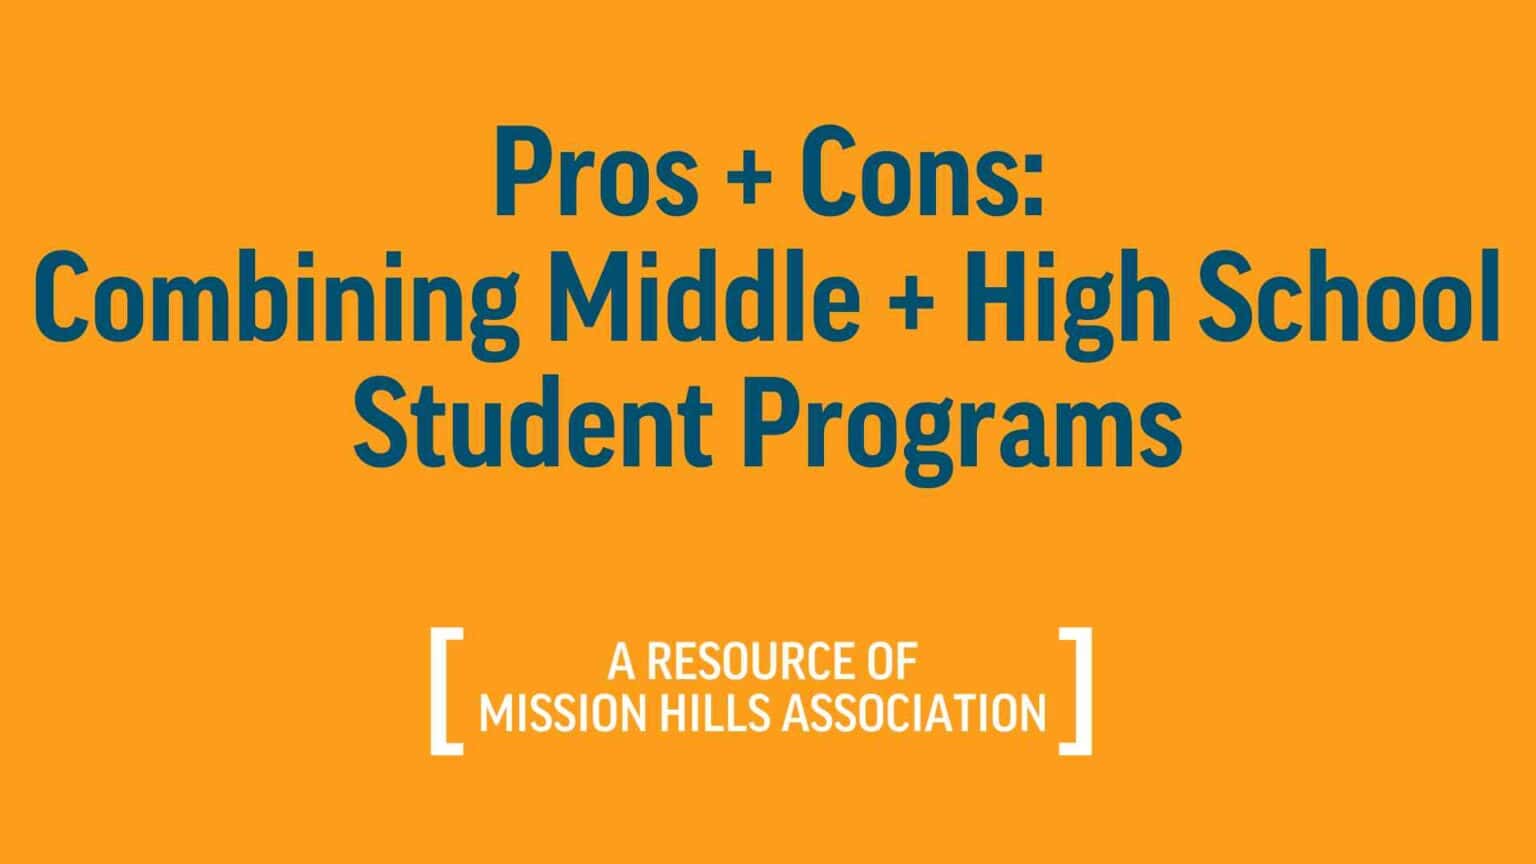 Pros + Cons: Combining Middle + High School Student Programs